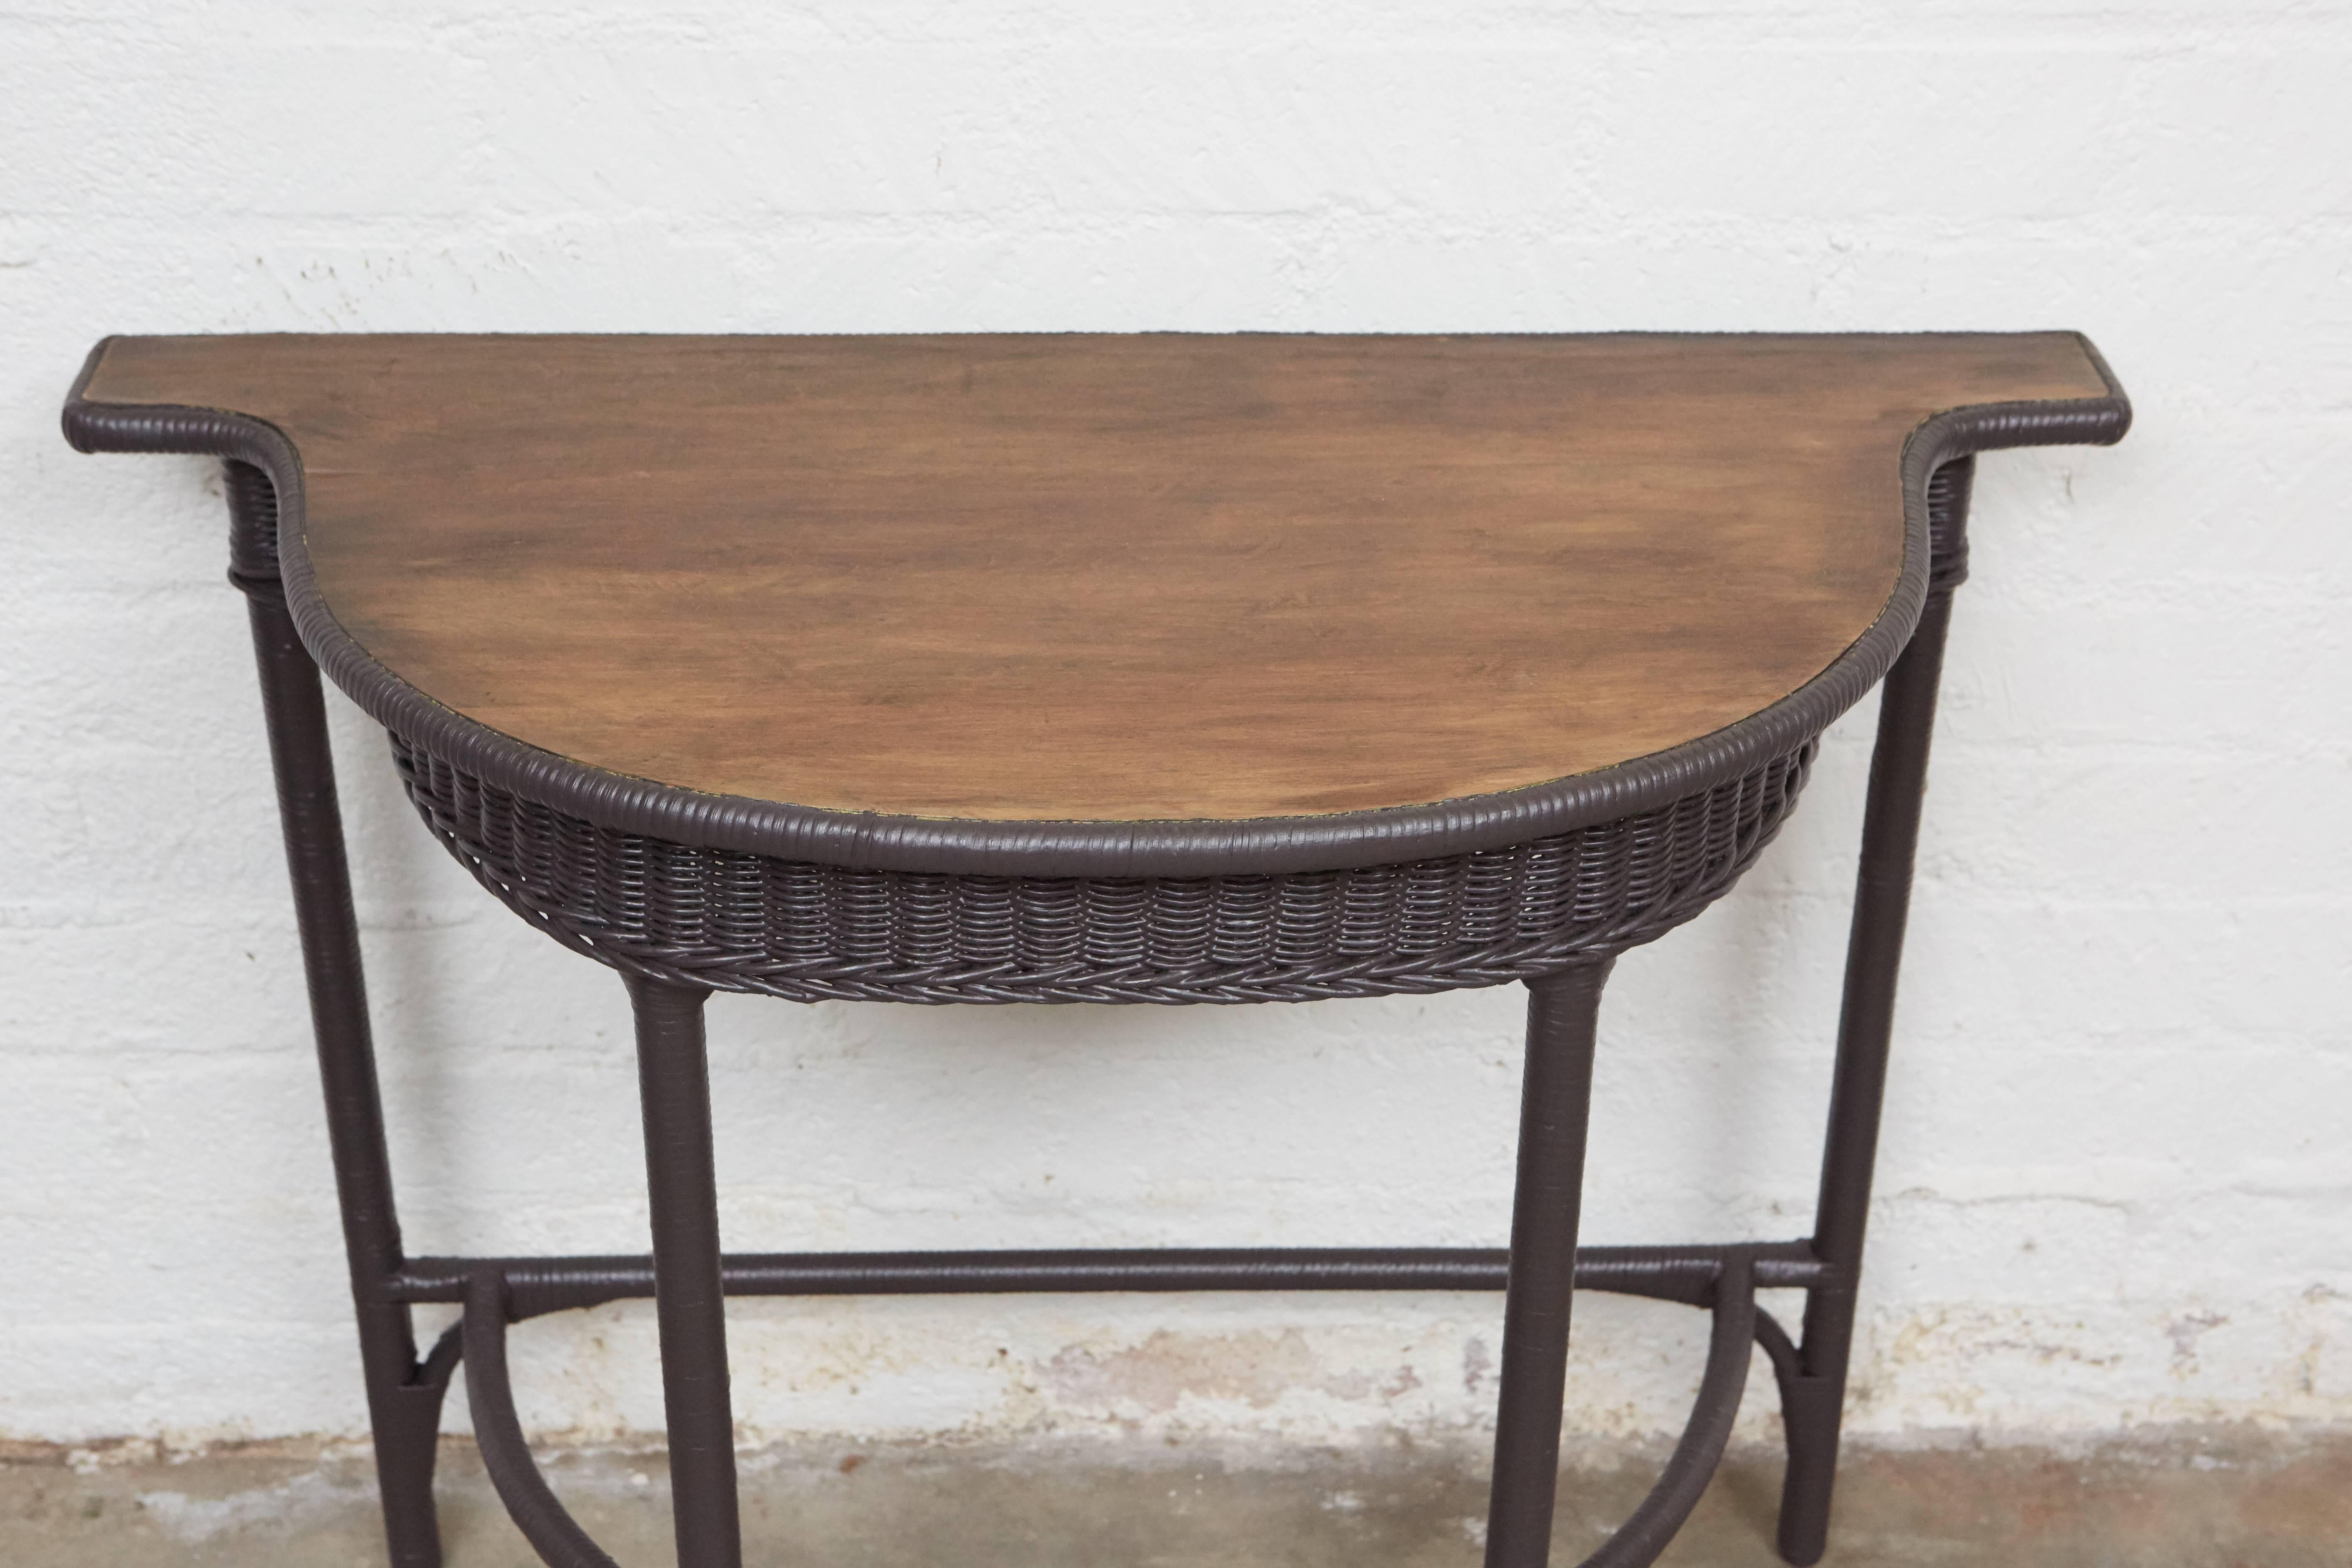 This wicker table has a really special shape with a nice oak top. The wicker skirt, legs and supports are painted with ash brown Farrow & Ball paint that gives the piece a great look for a variety of settings. 

  